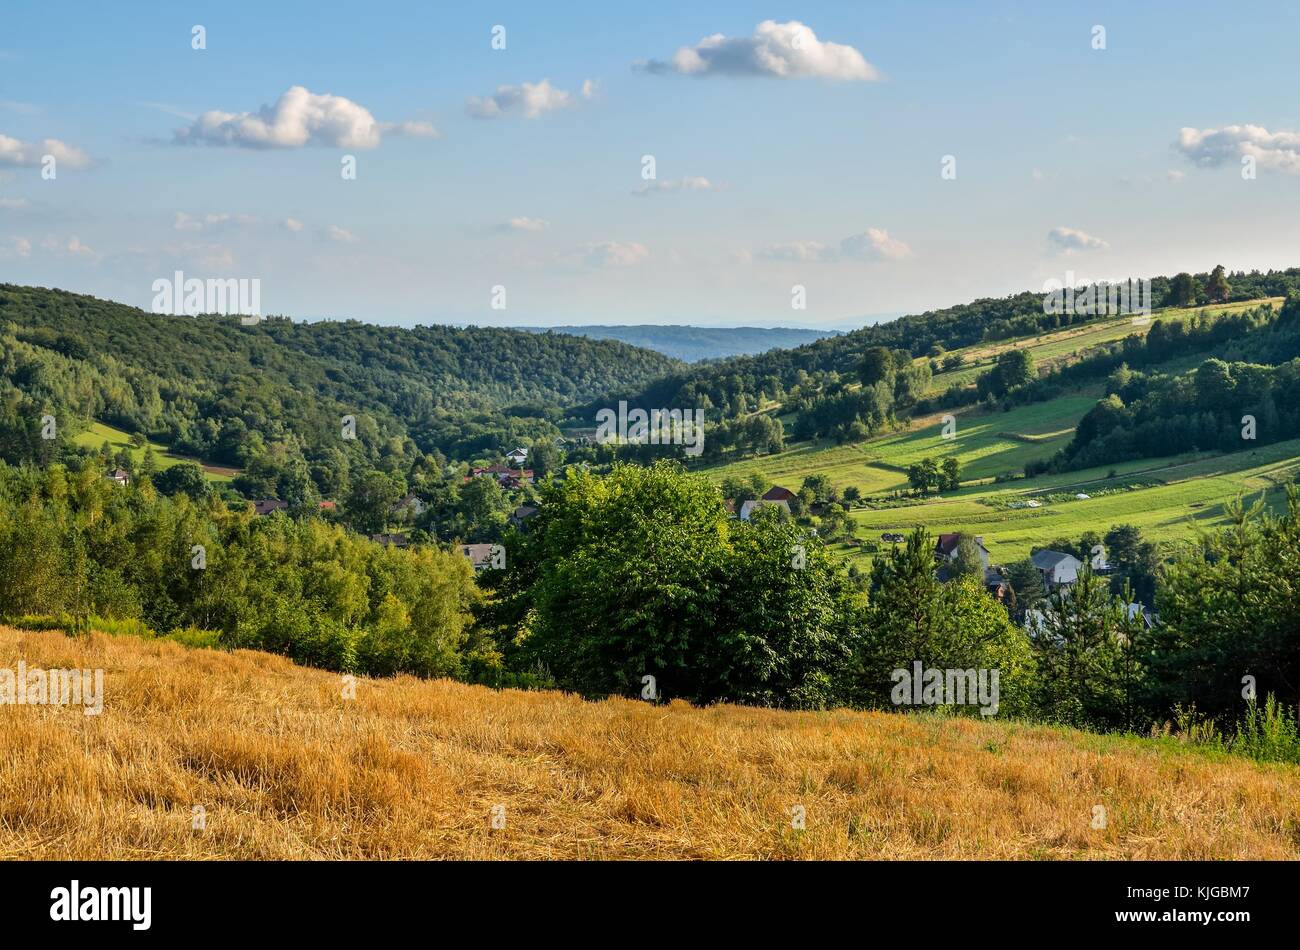 Rural summer landscape. A village in a beautiful Jurassic valley in Poland. Stock Photo